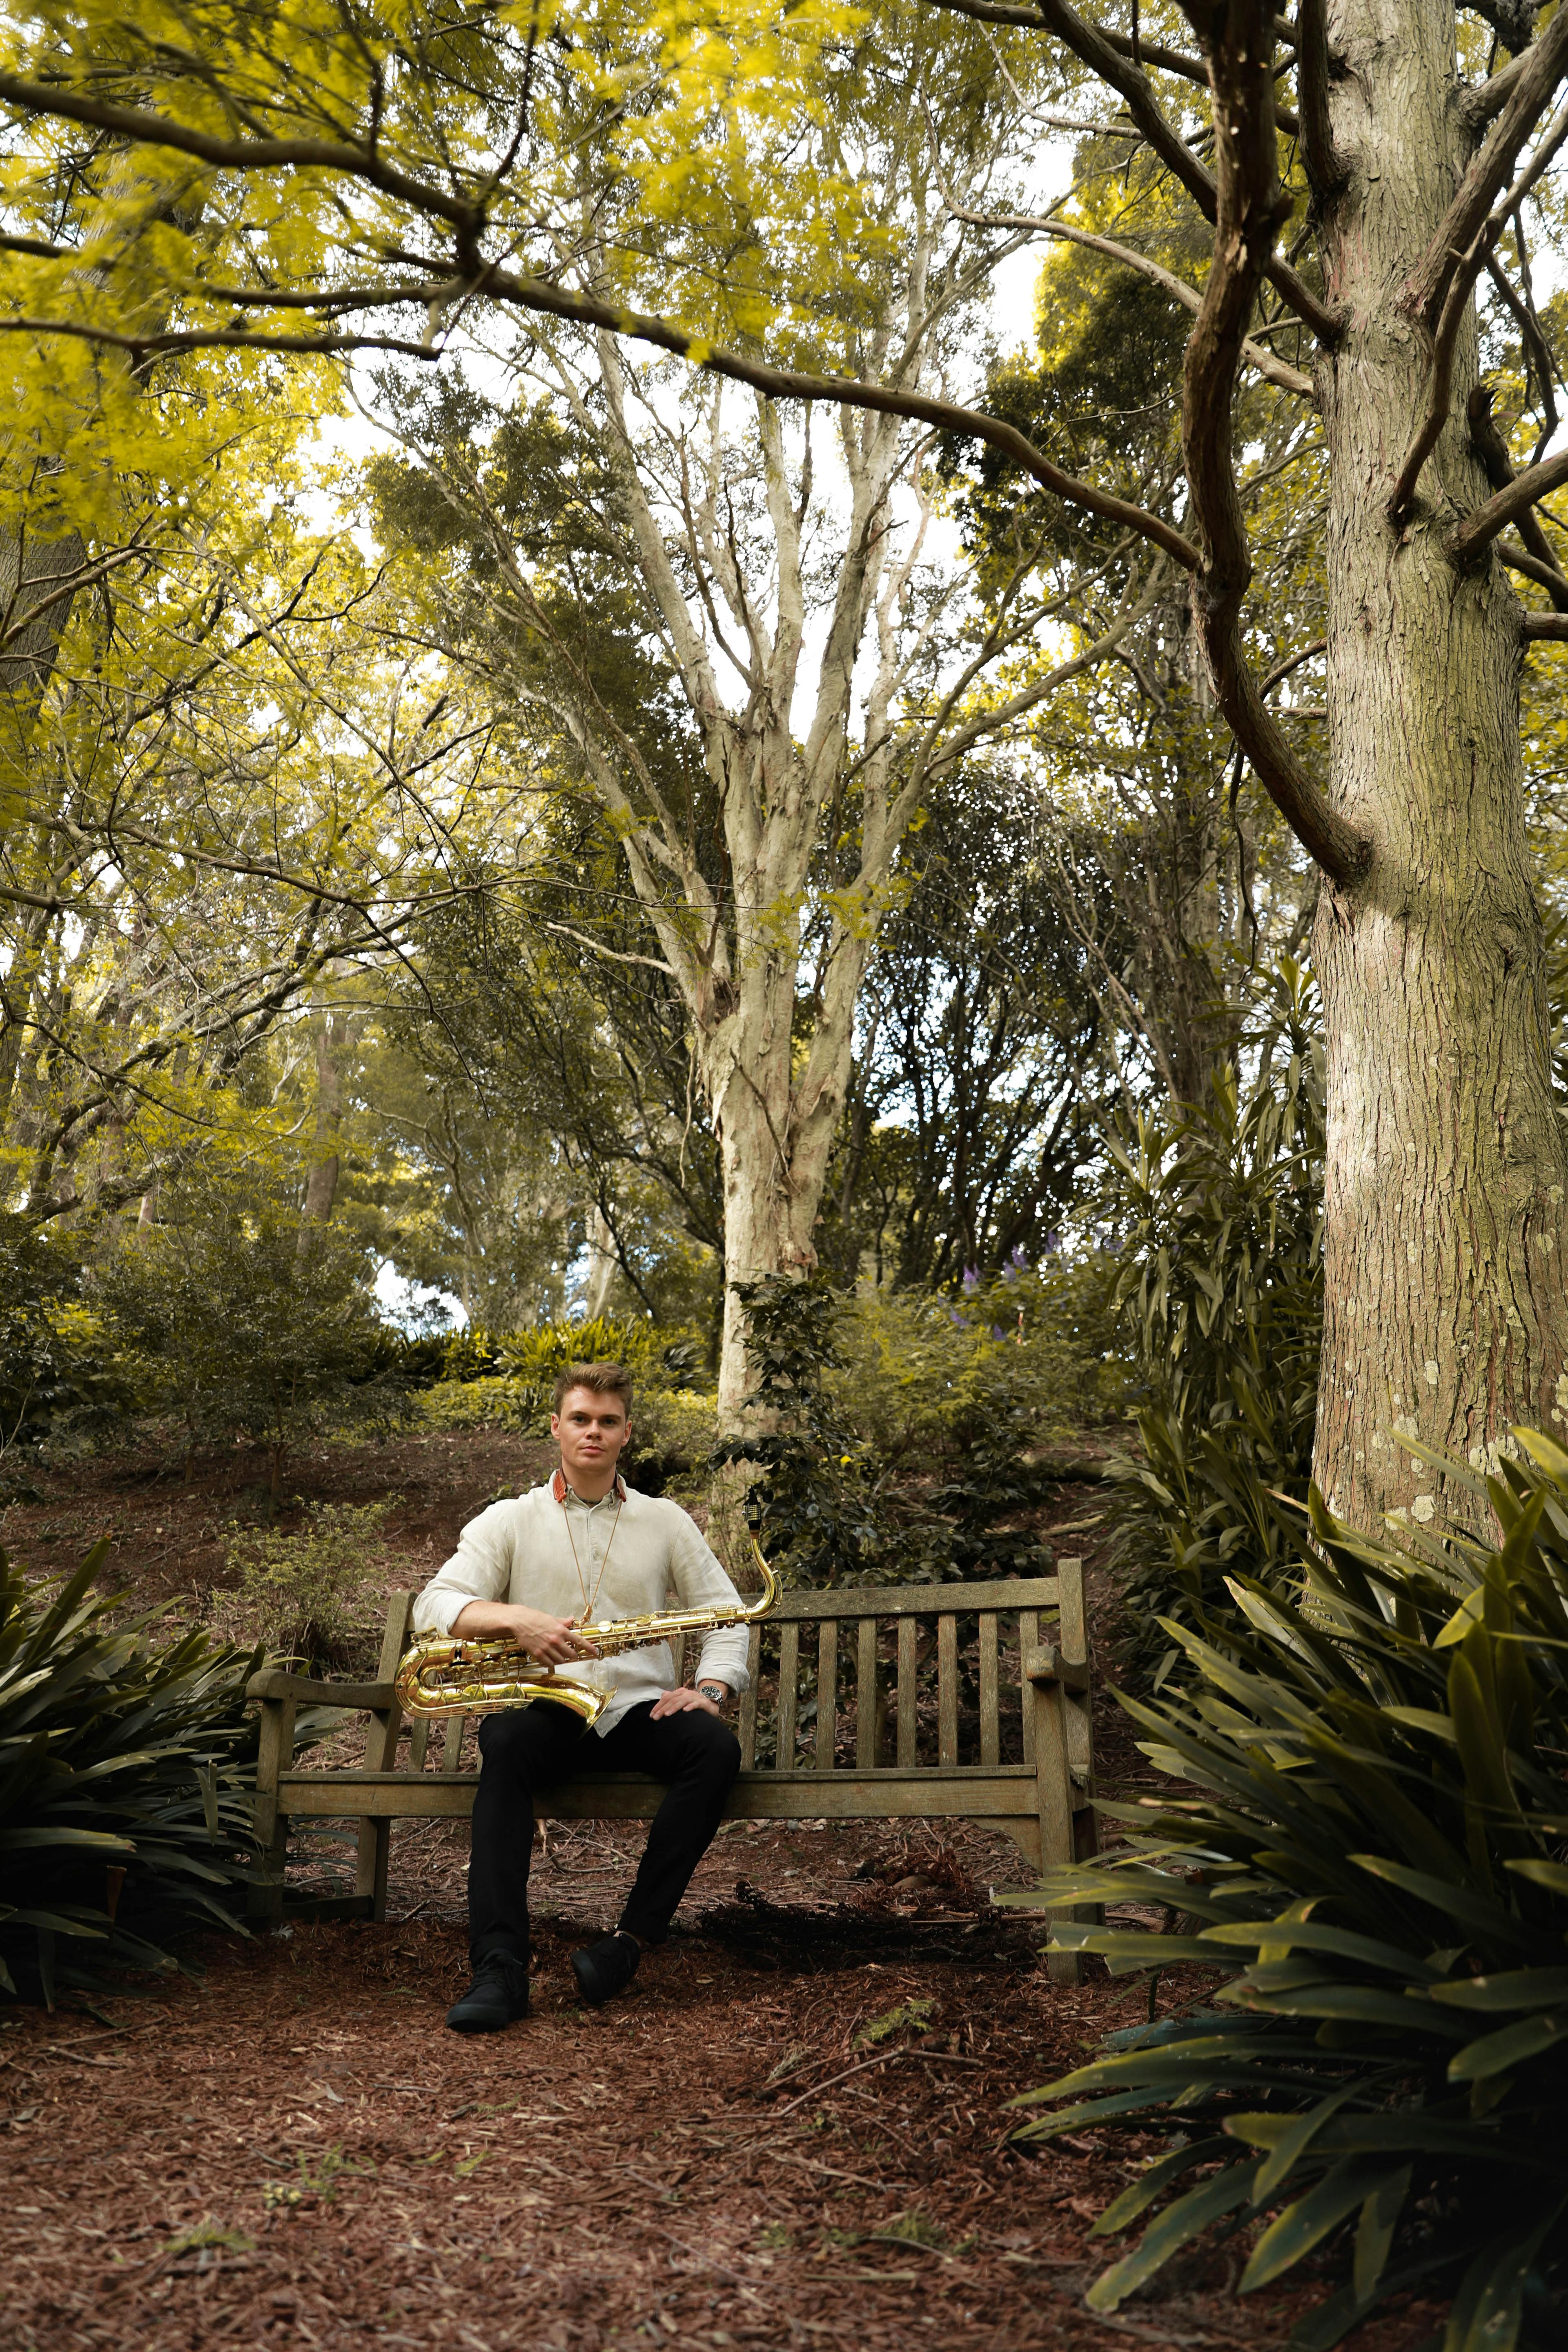 Background image of Jayden sitting in the distance amongst the trees